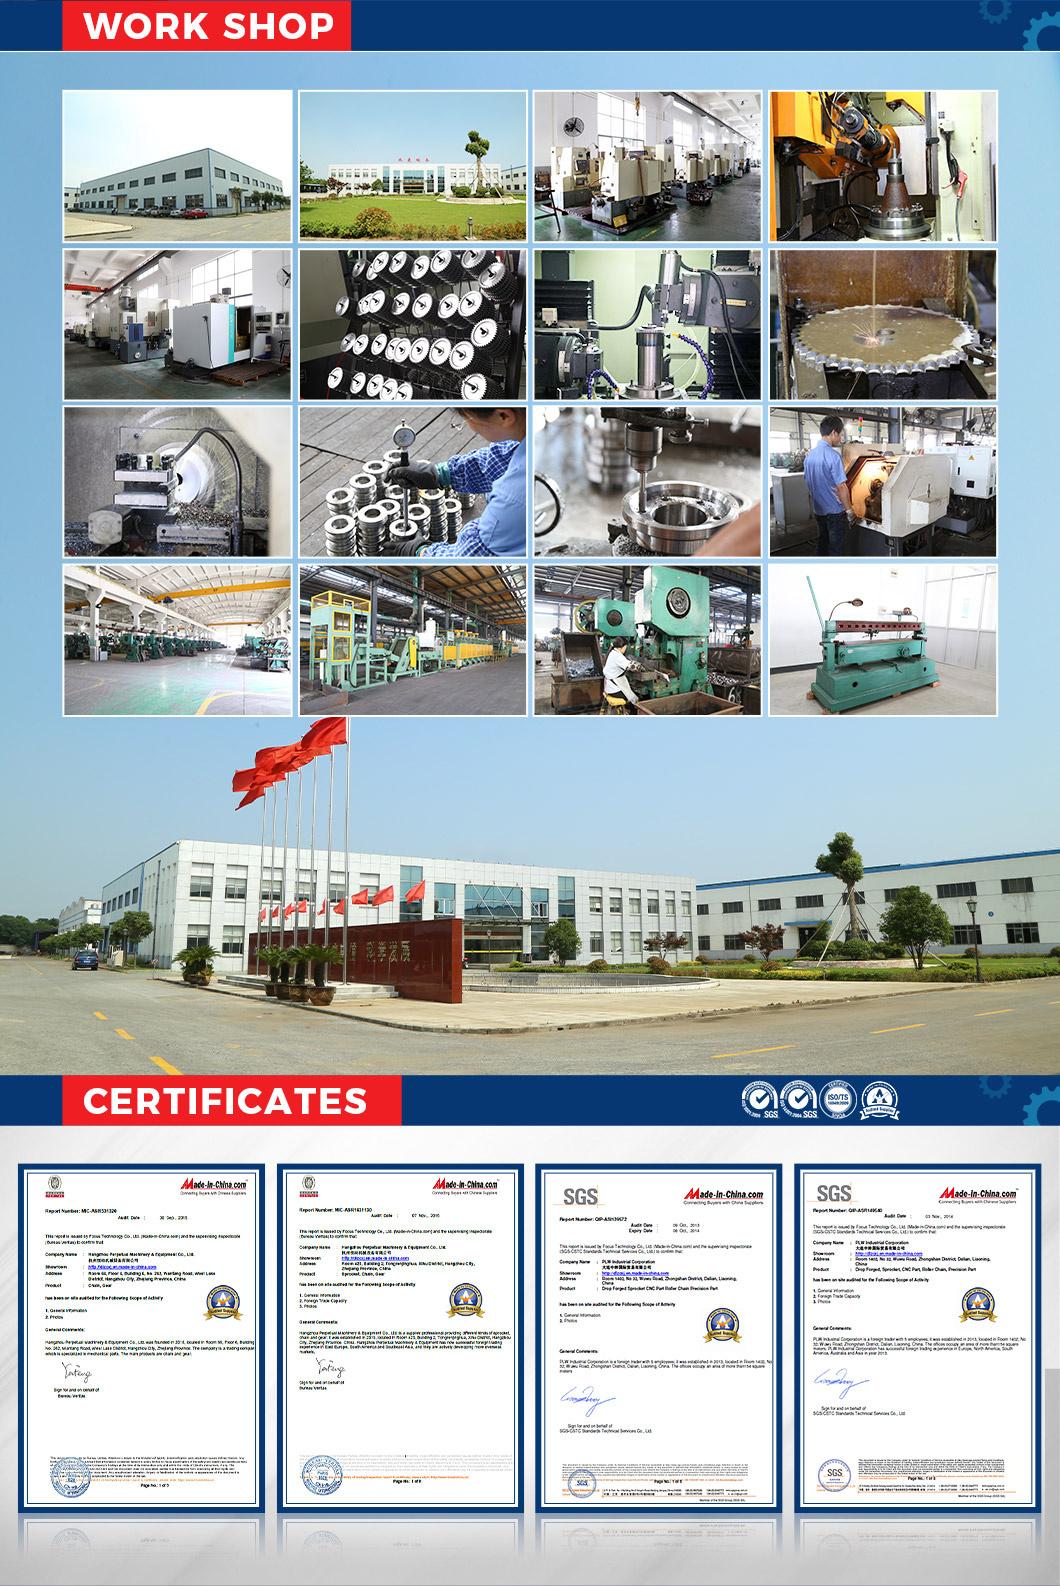 Advanced Surface Treatment Craft Customized Different Shape Finished Bore Corn Harvest Sprocket